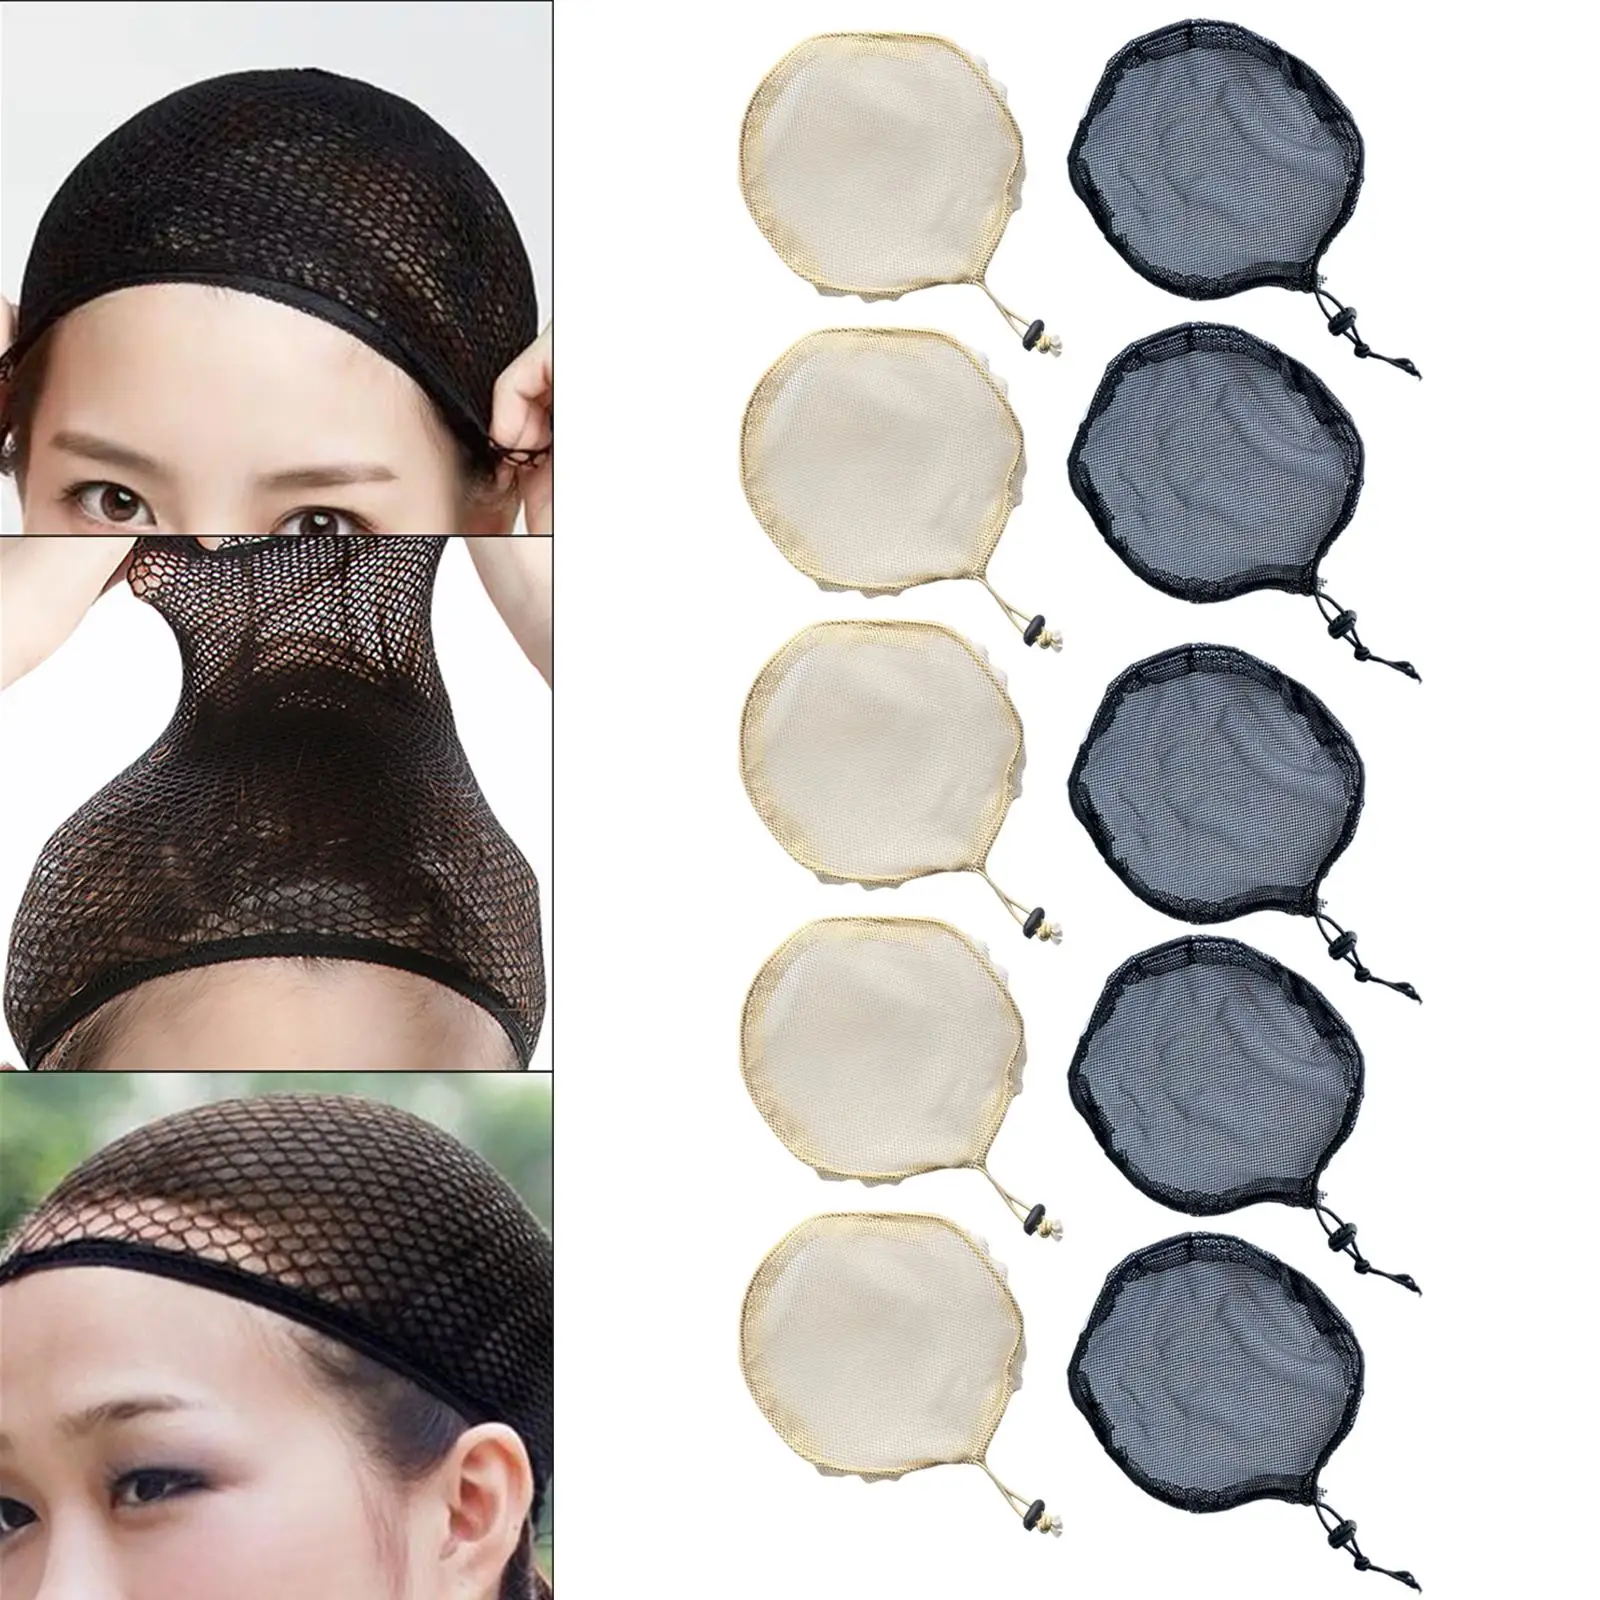 5 Pieces Wig Caps Liner Weaving Stretchy Stocking Hair Net for Halloween Cosplay Kids